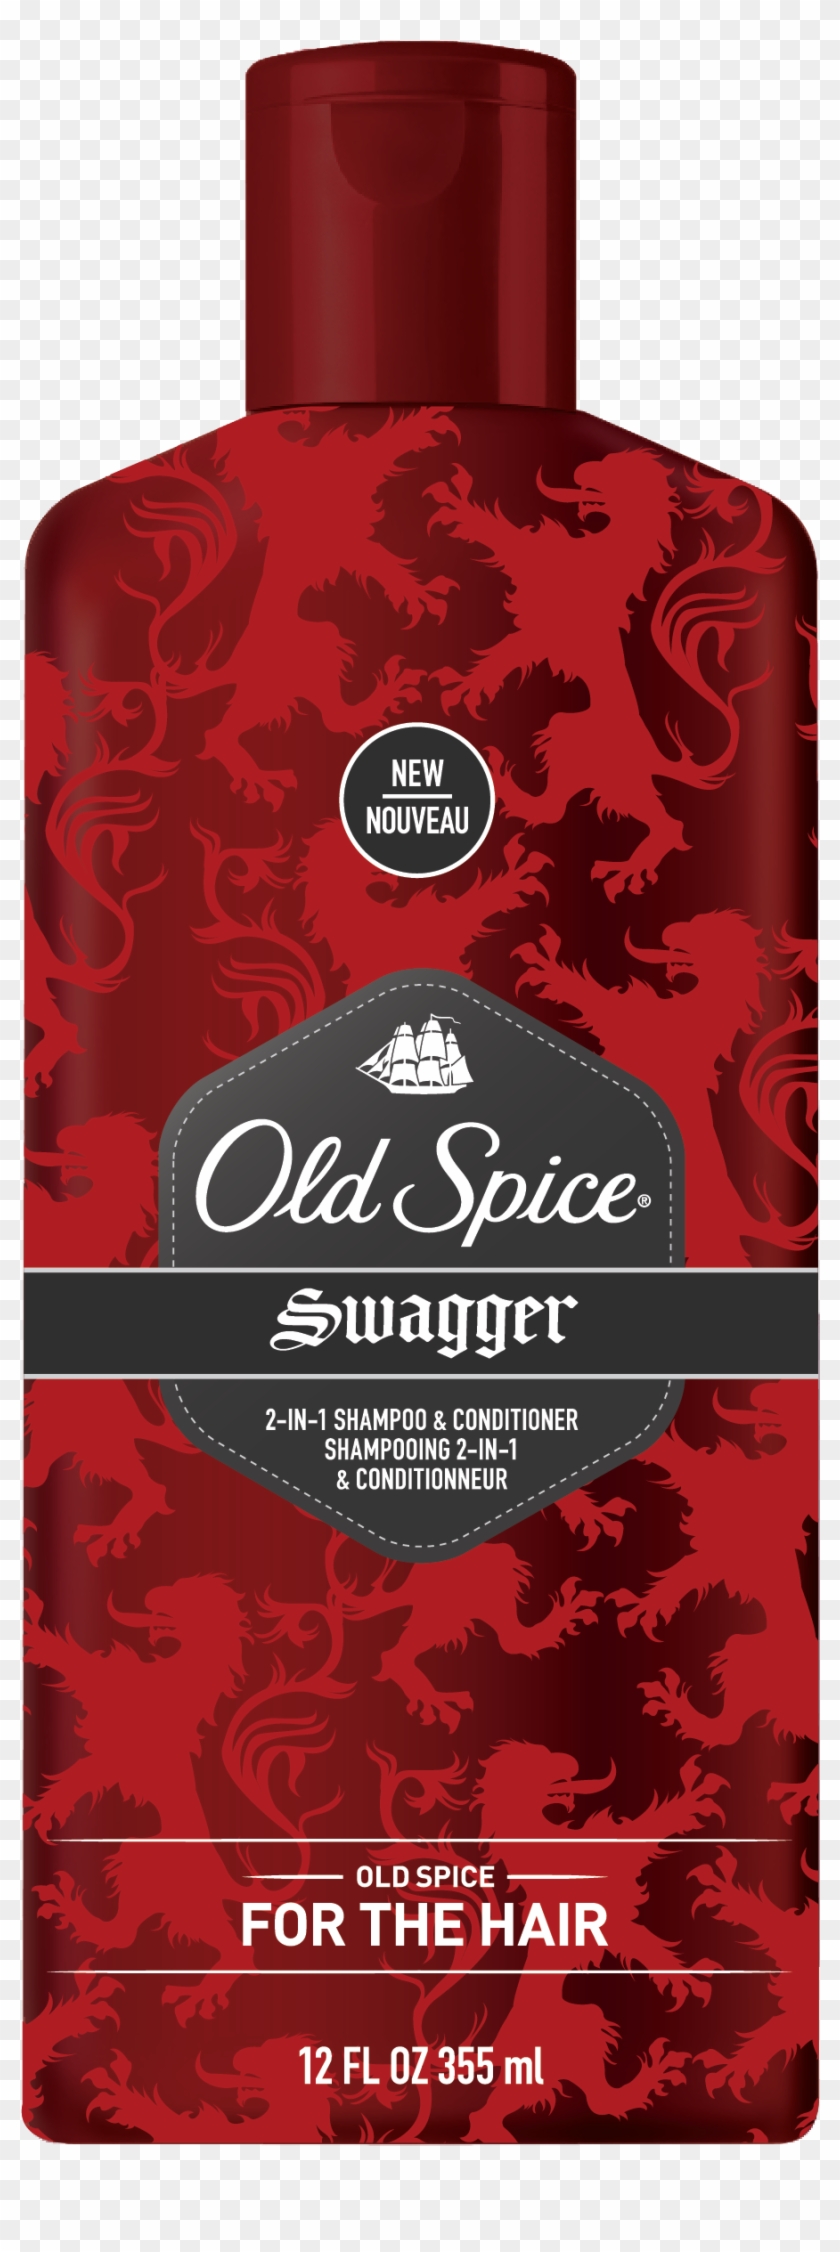 Old Spice Swagger Shampoo - Old Spice Swagger Clipart #5906580